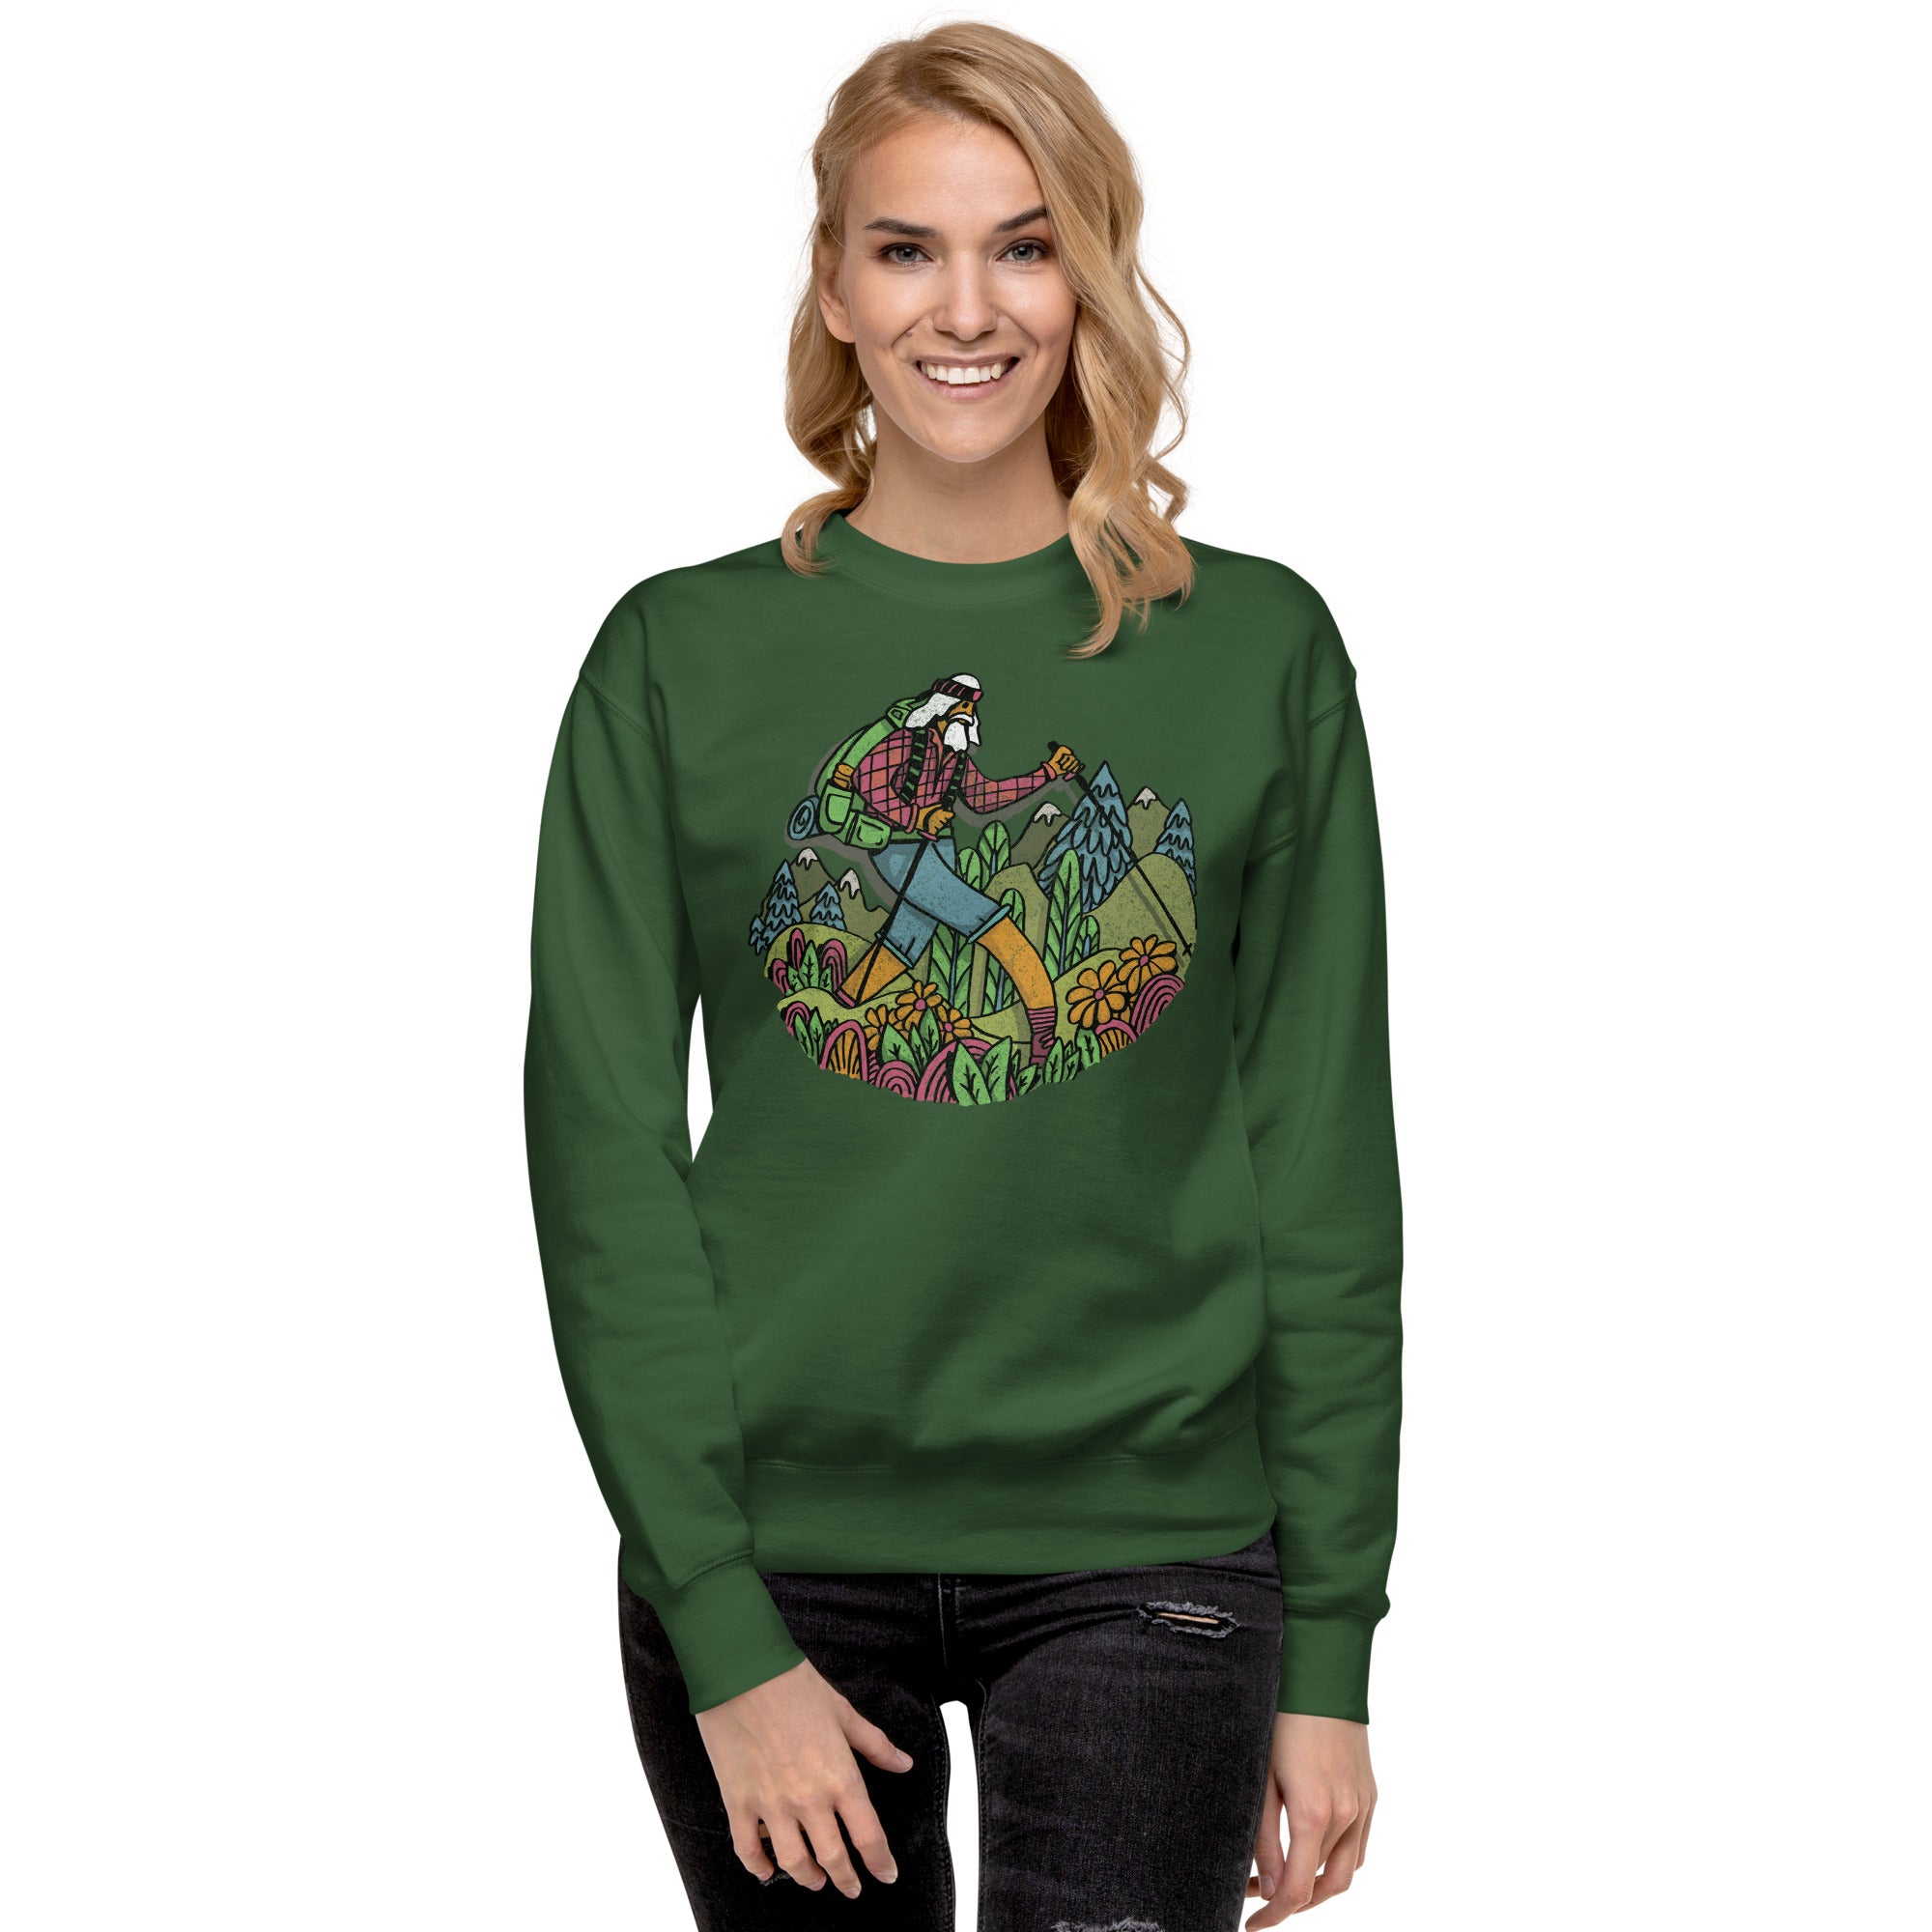 Wise Hiker | Design By Dylan Fant Cool Classic Sweatshirt | Vintage Outdoorsy Fleece on Model | Solid Threads